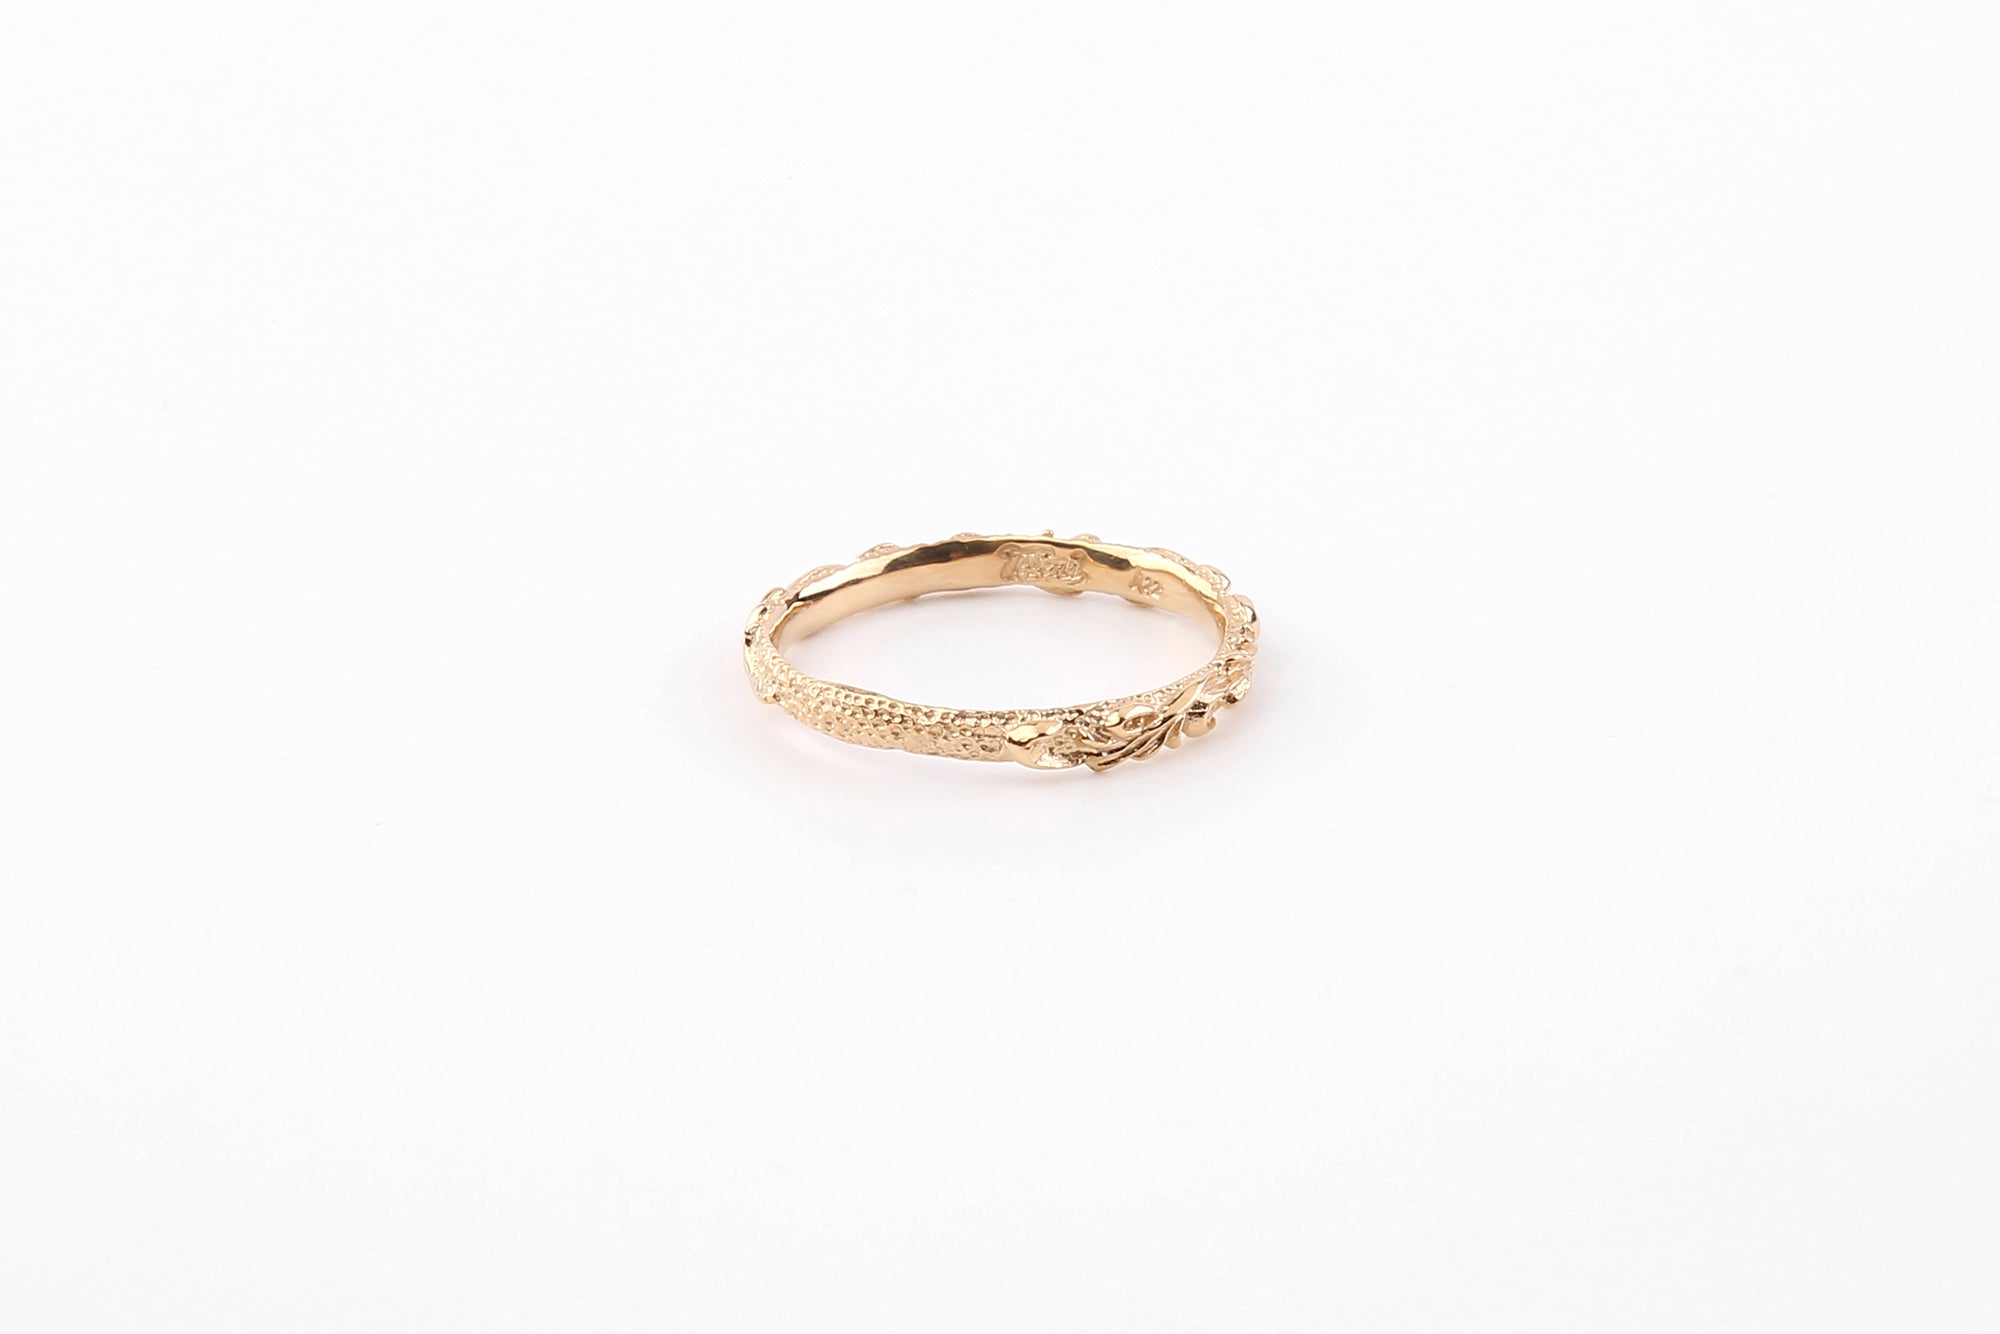 Legend Extra Small "Flora" 22k Gold Ring